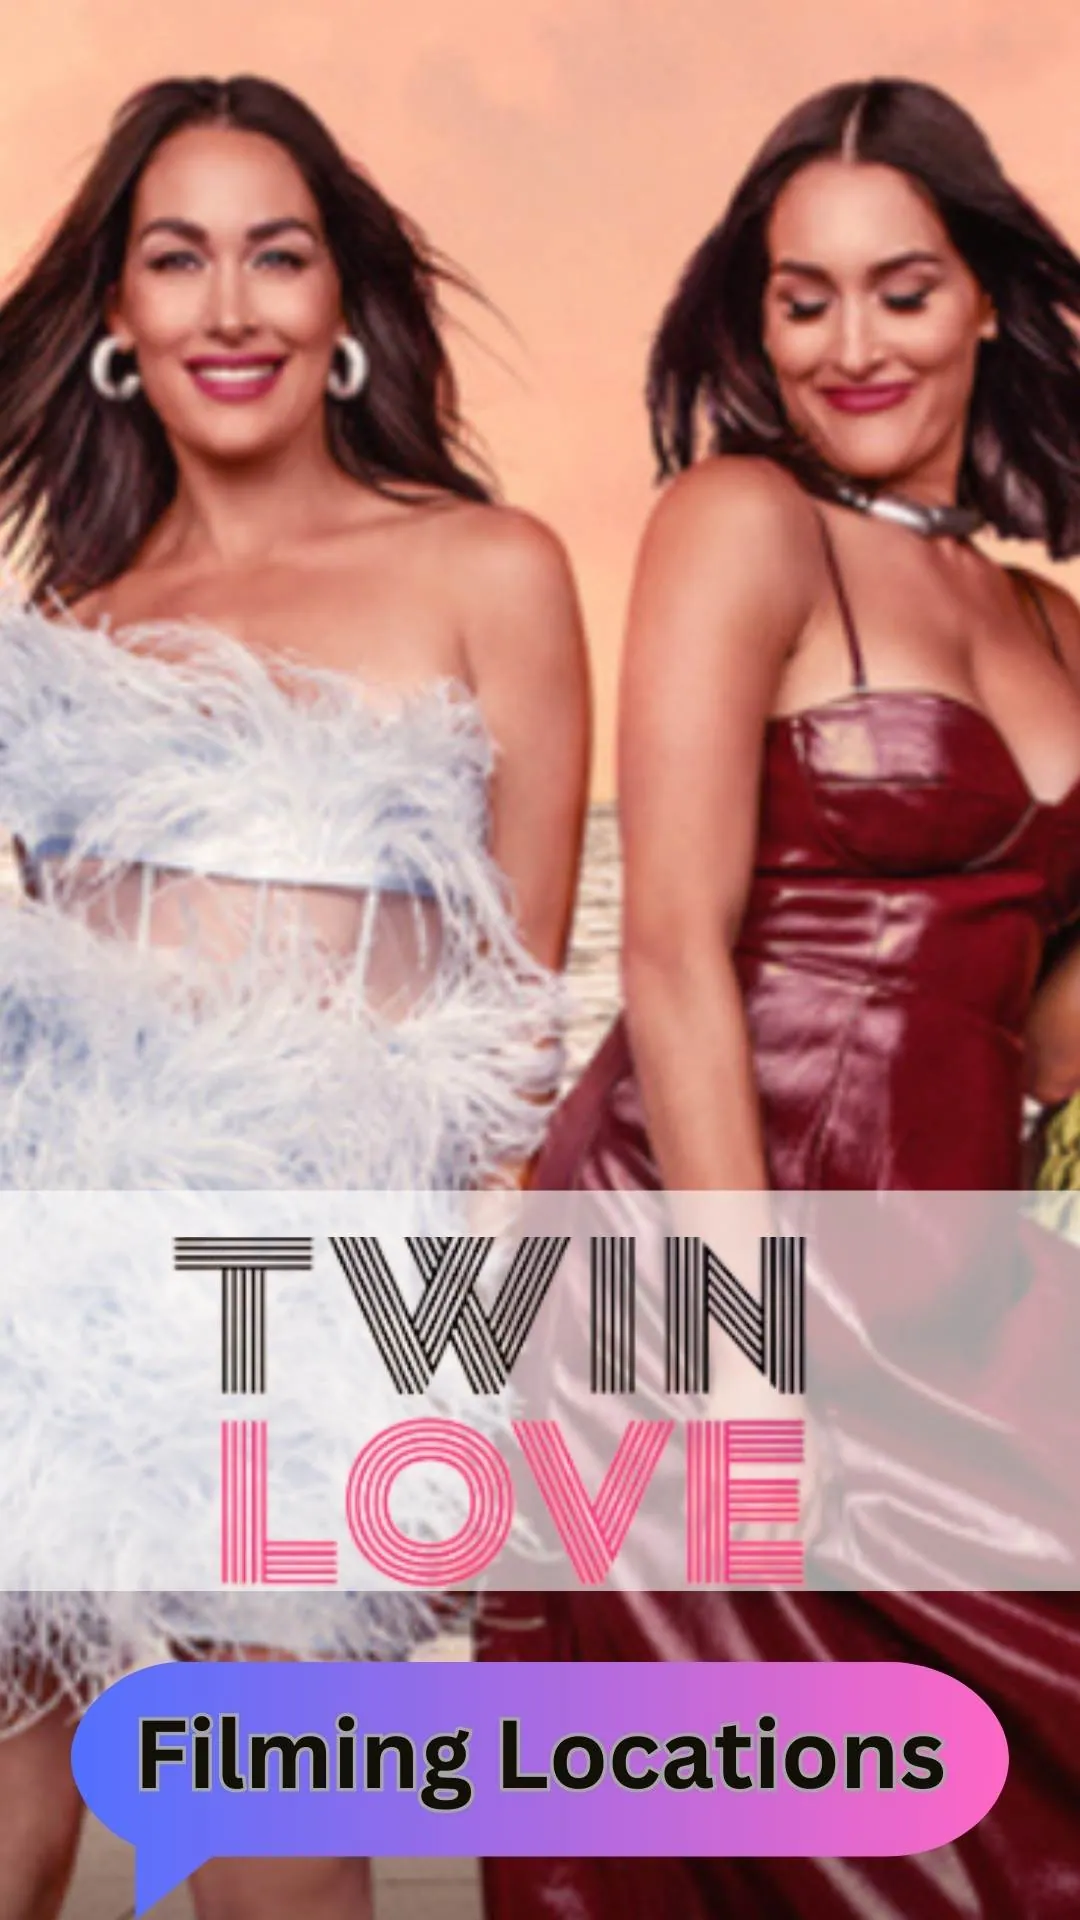 Twin Love Filming Locations (2023)